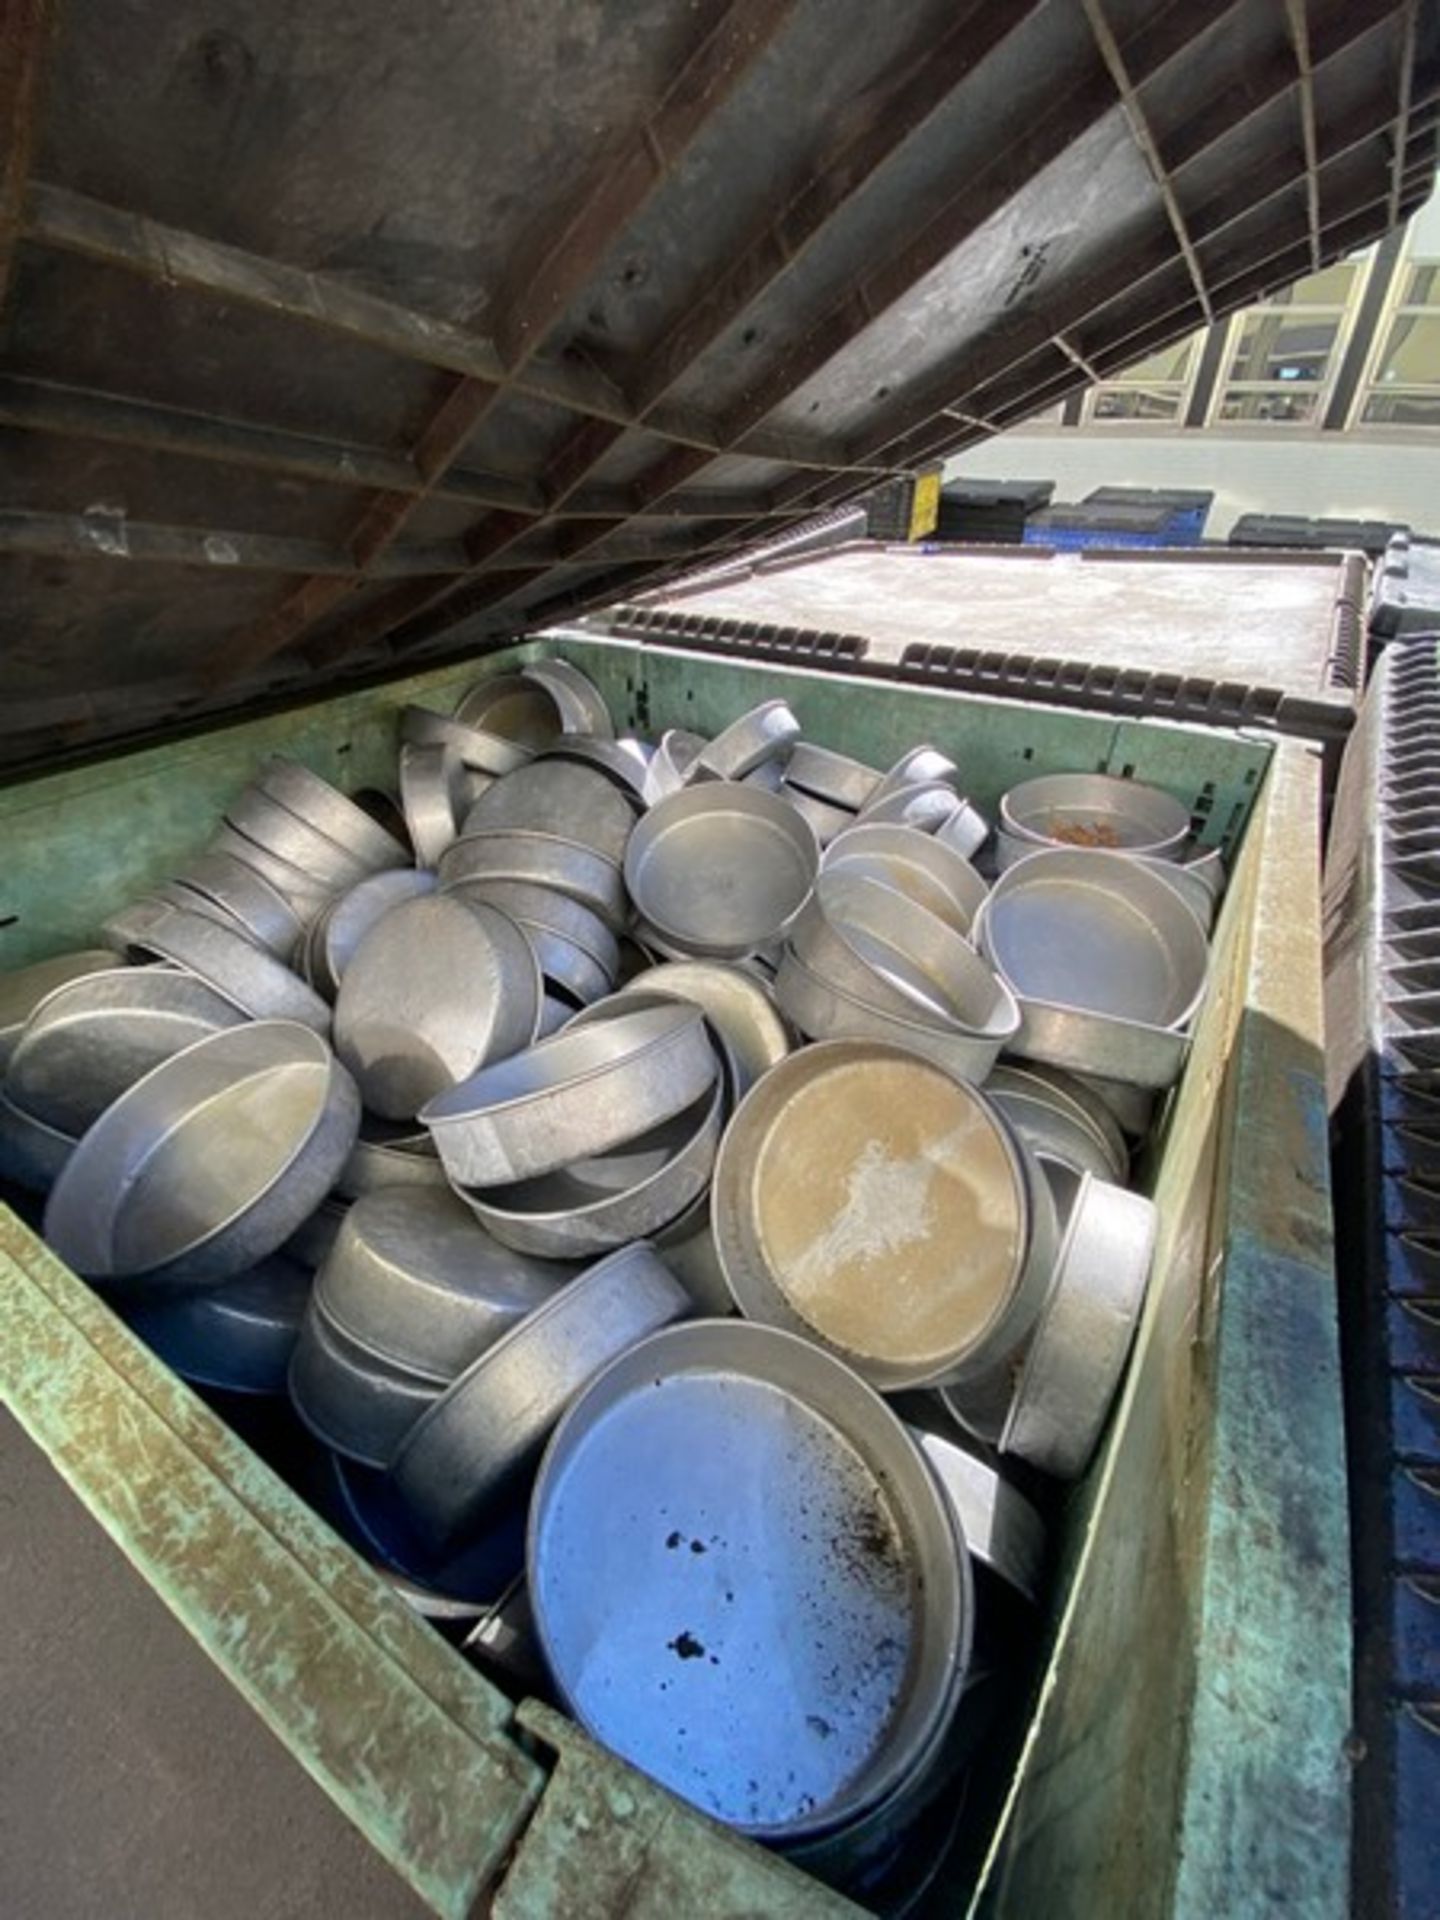 Lot of Assorted 8” Round Aluminum Pans, Aprox. (200) Pans with Aprox. 48” L x 45” W x 49” H - Image 3 of 3